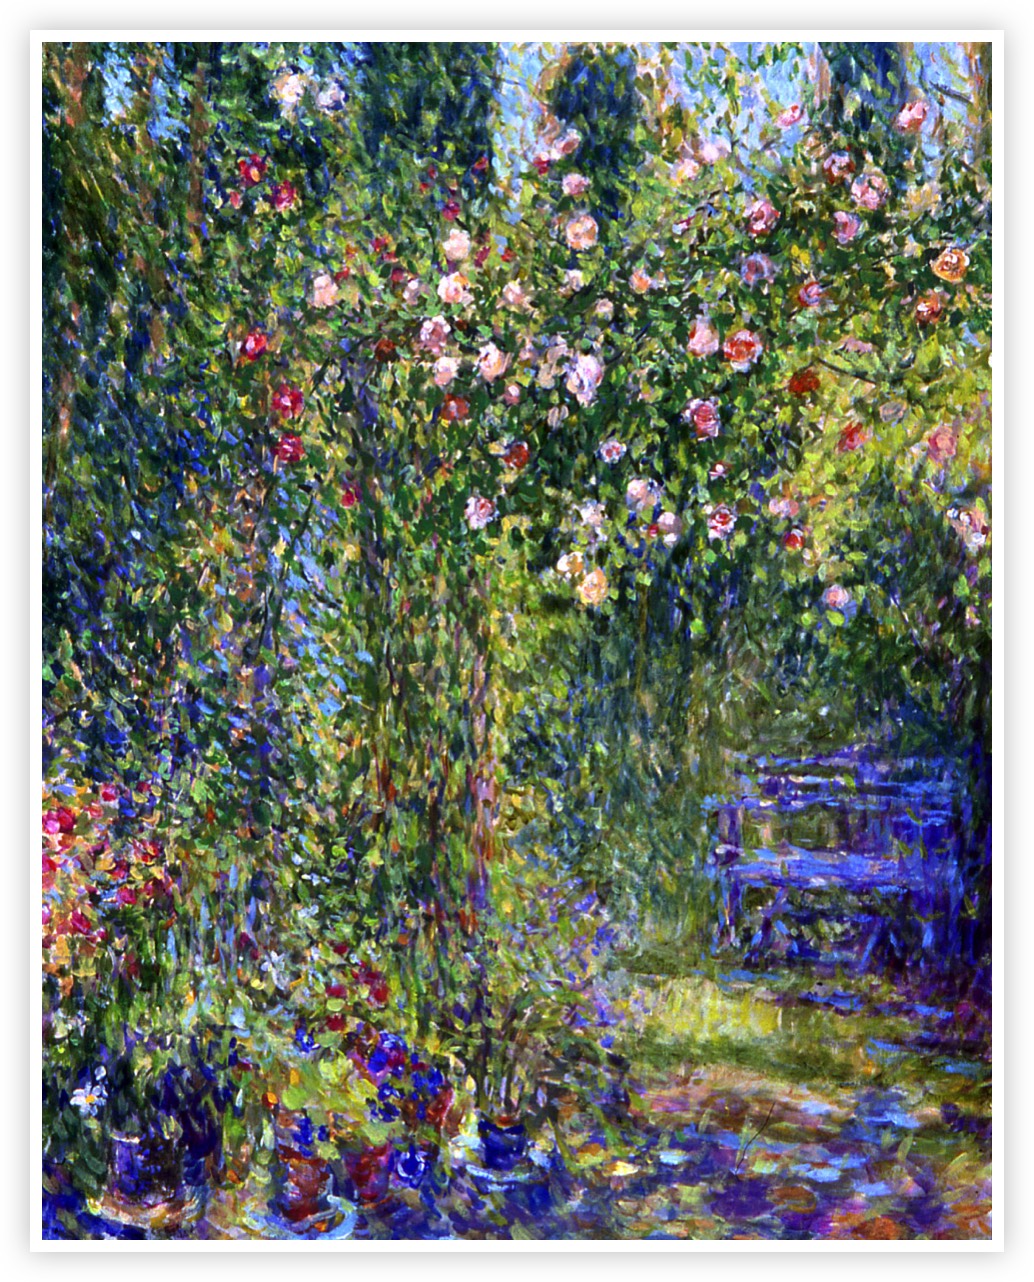 Lauras Garden - oil on canvas - 24inches X 30inches - SOLD